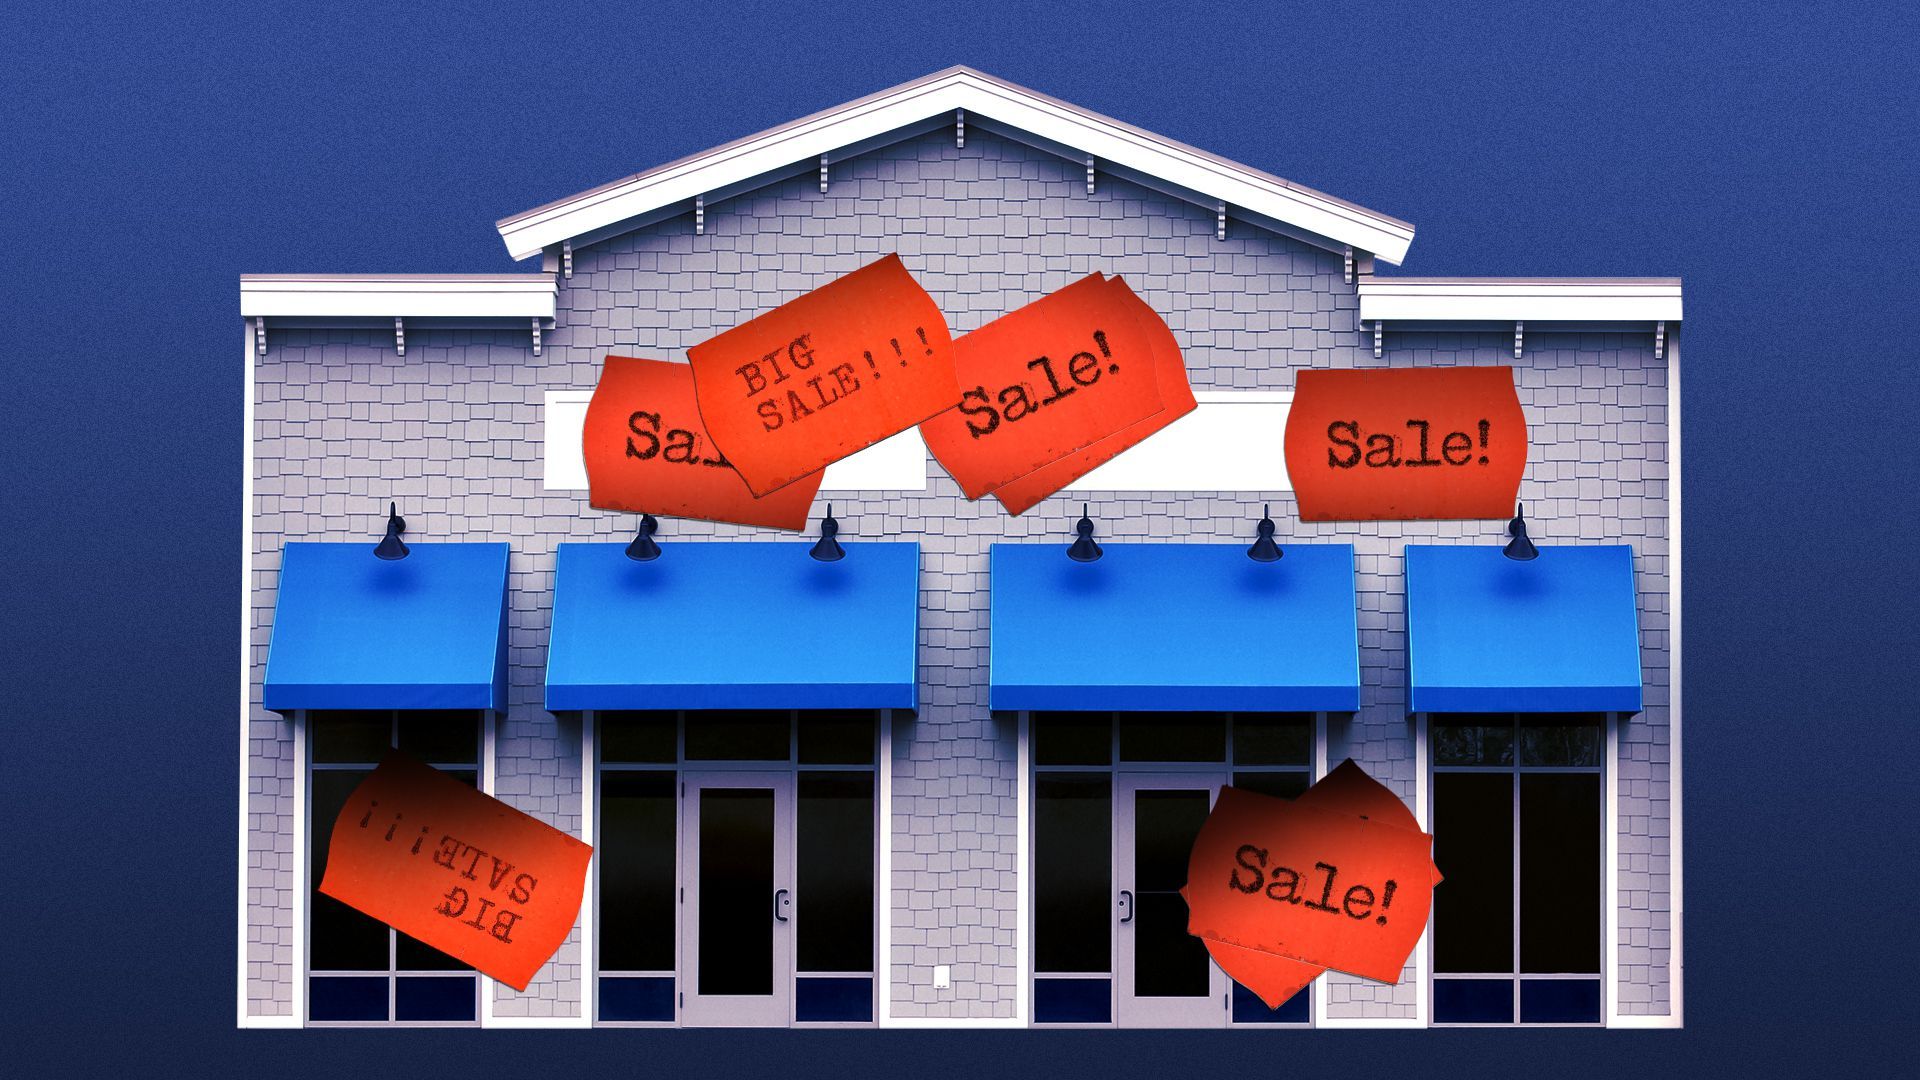 Illustration of a retail building covered in sale stickers